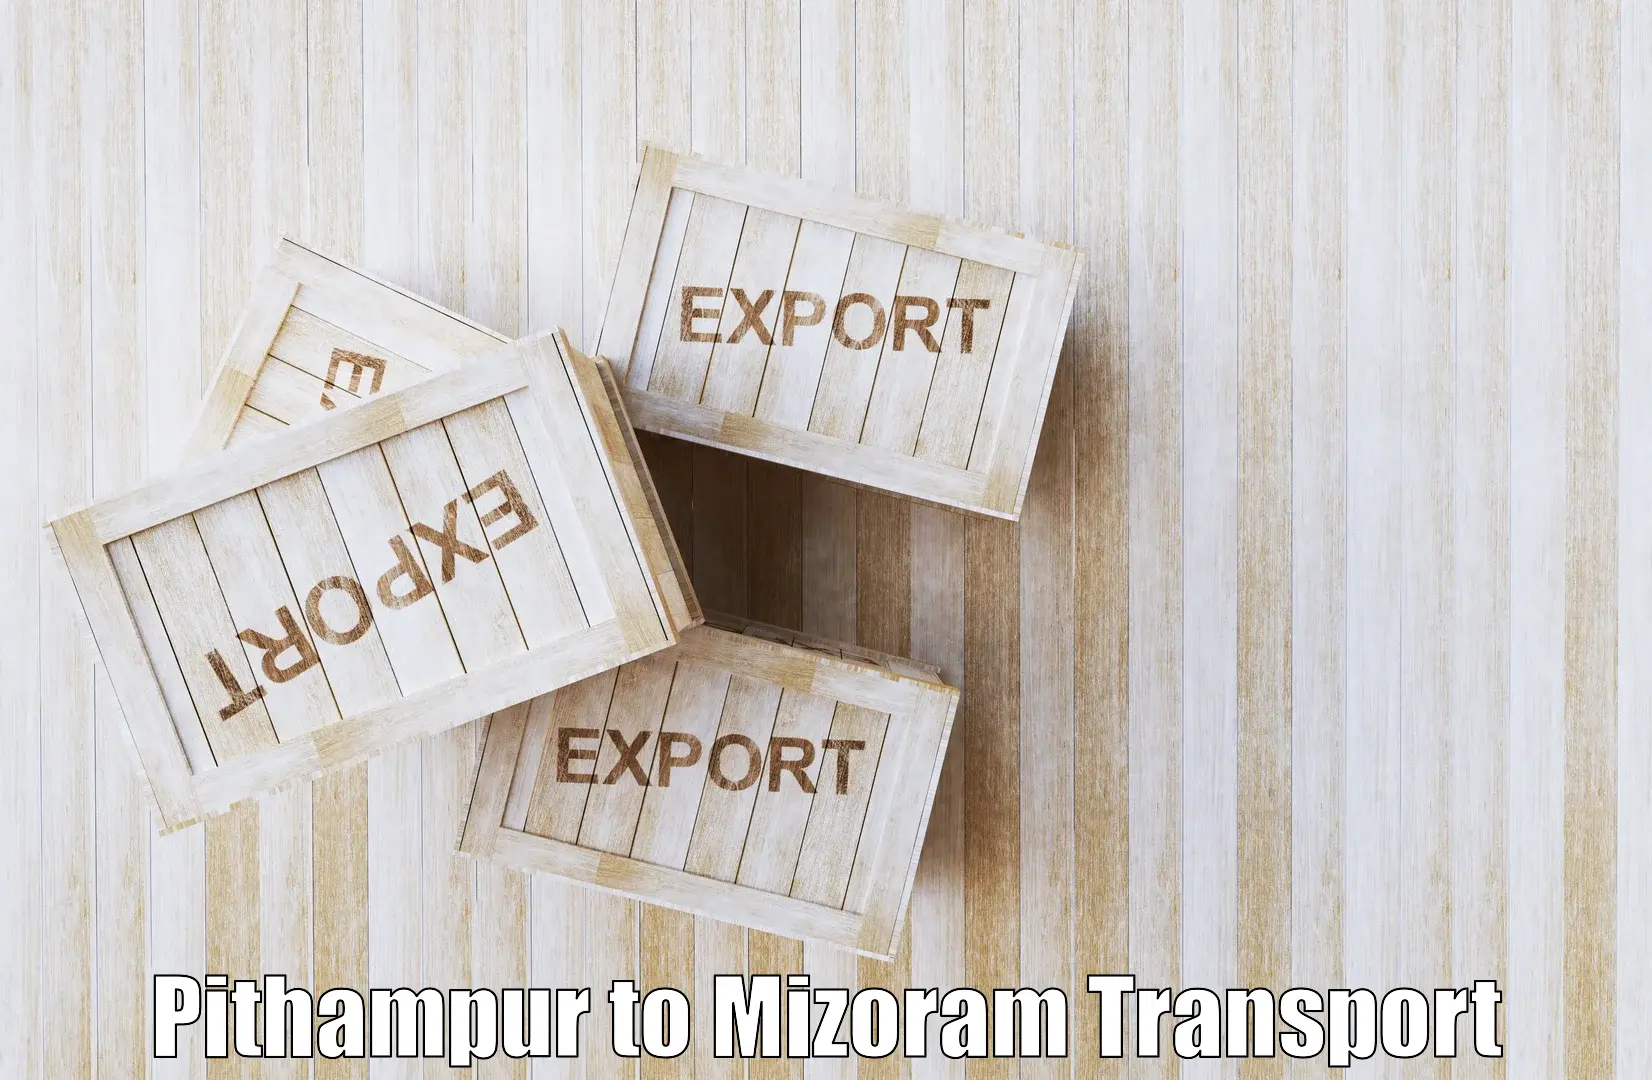 Delivery service Pithampur to Mizoram